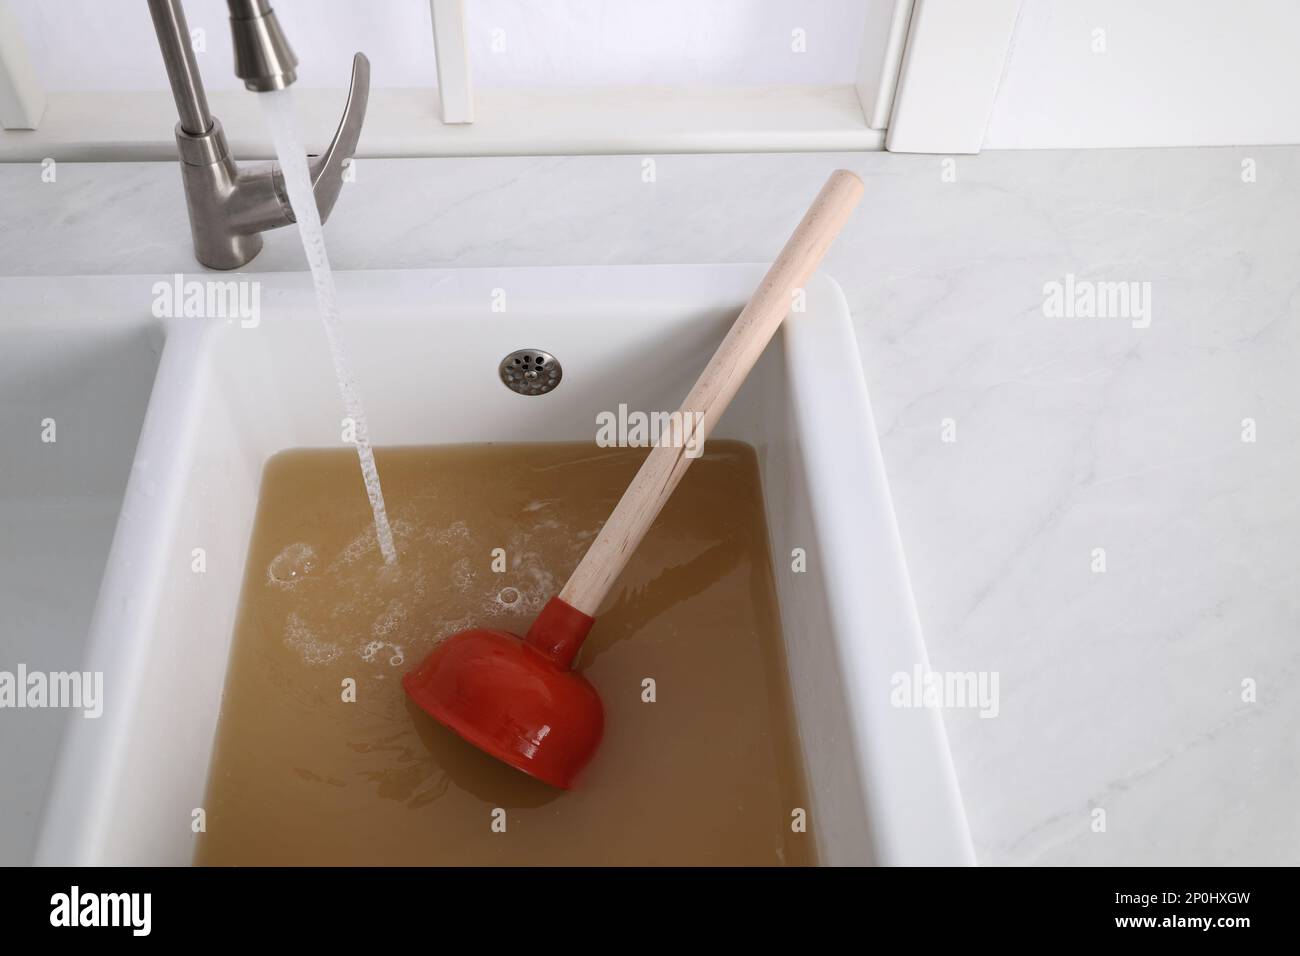 https://c8.alamy.com/comp/2P0HXGW/clogged-kitchen-sink-with-plunger-and-dirty-water-2P0HXGW.jpg